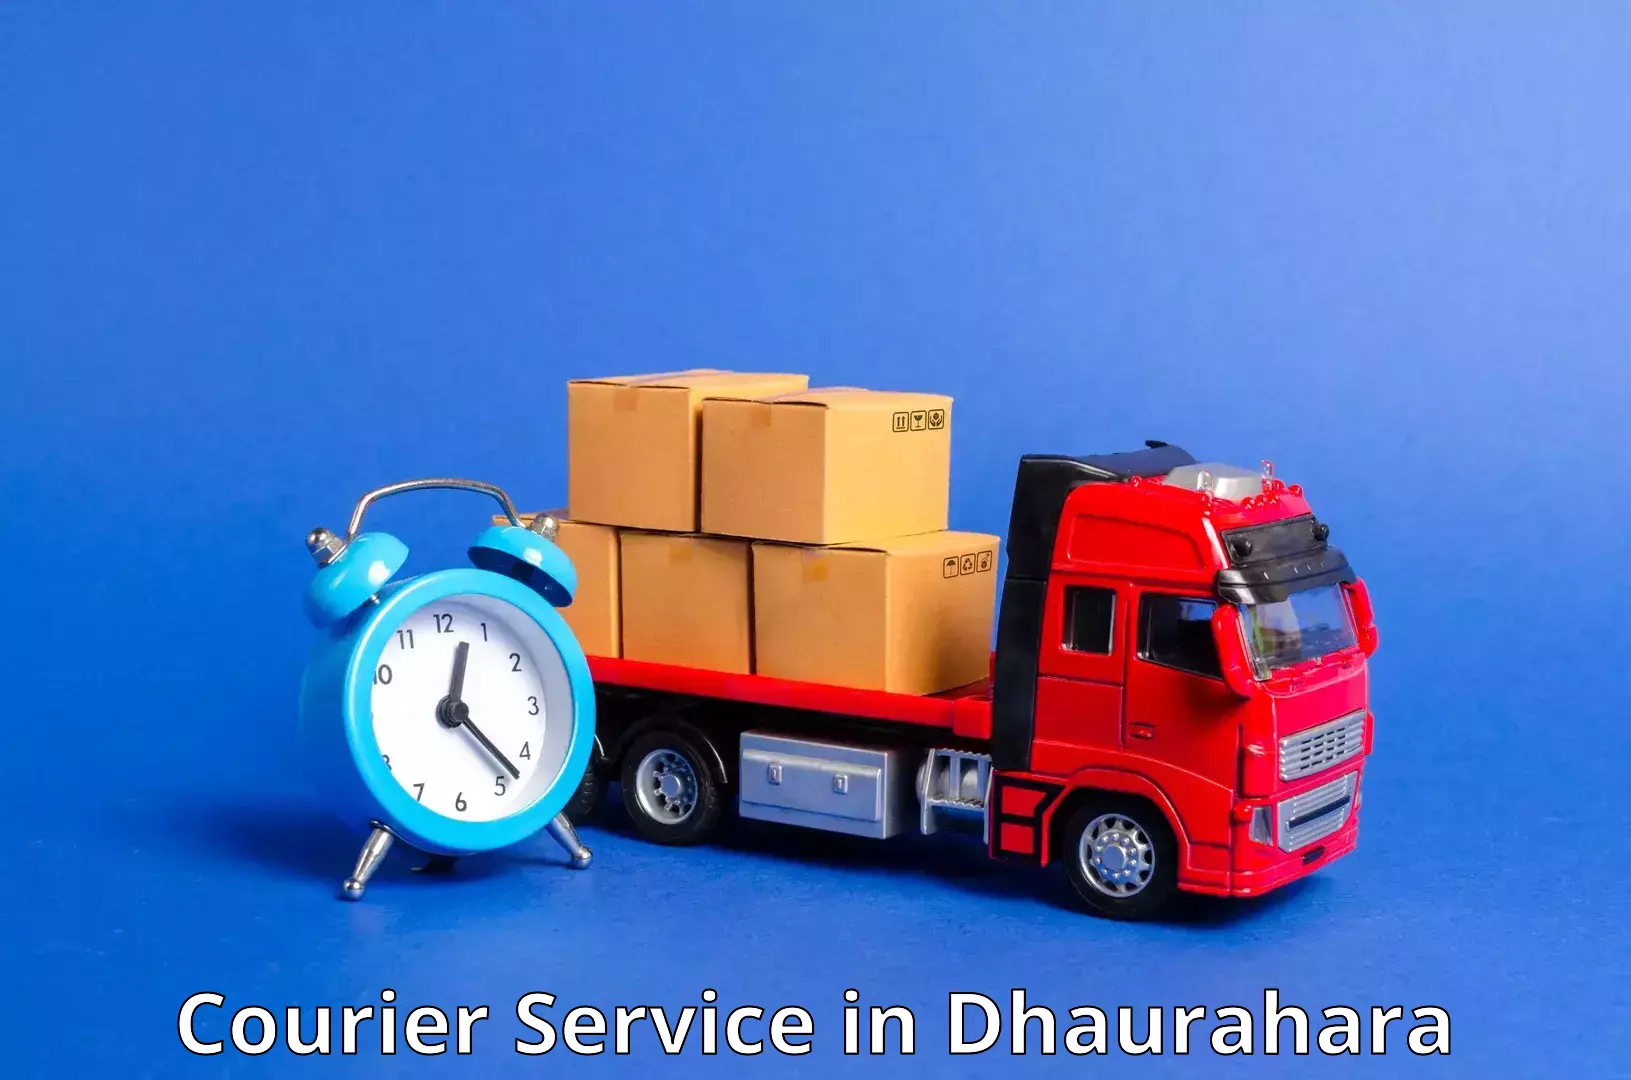 Multi-city courier in Dhaurahara